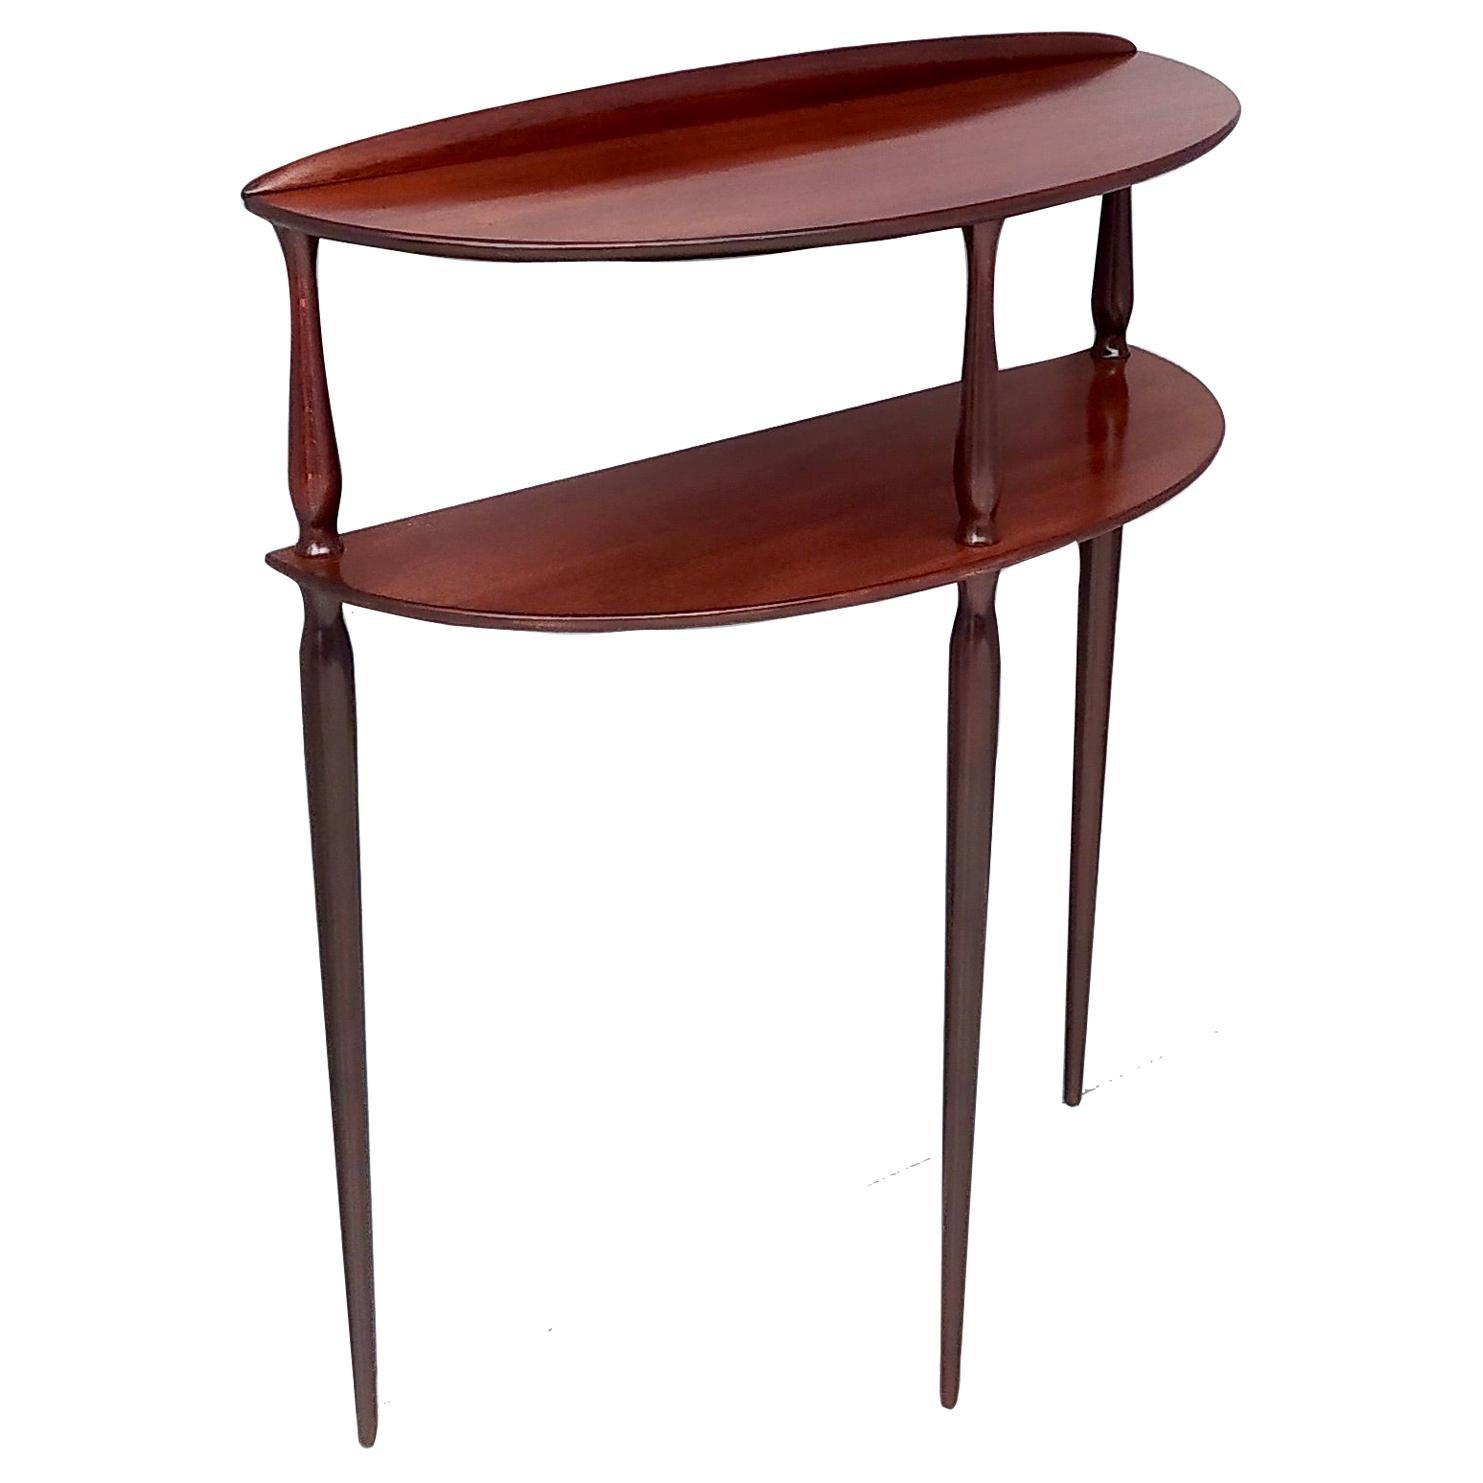 Midcentury Minimalist Demilune Mahogany Console with Two Shelves, Italy, 1950s